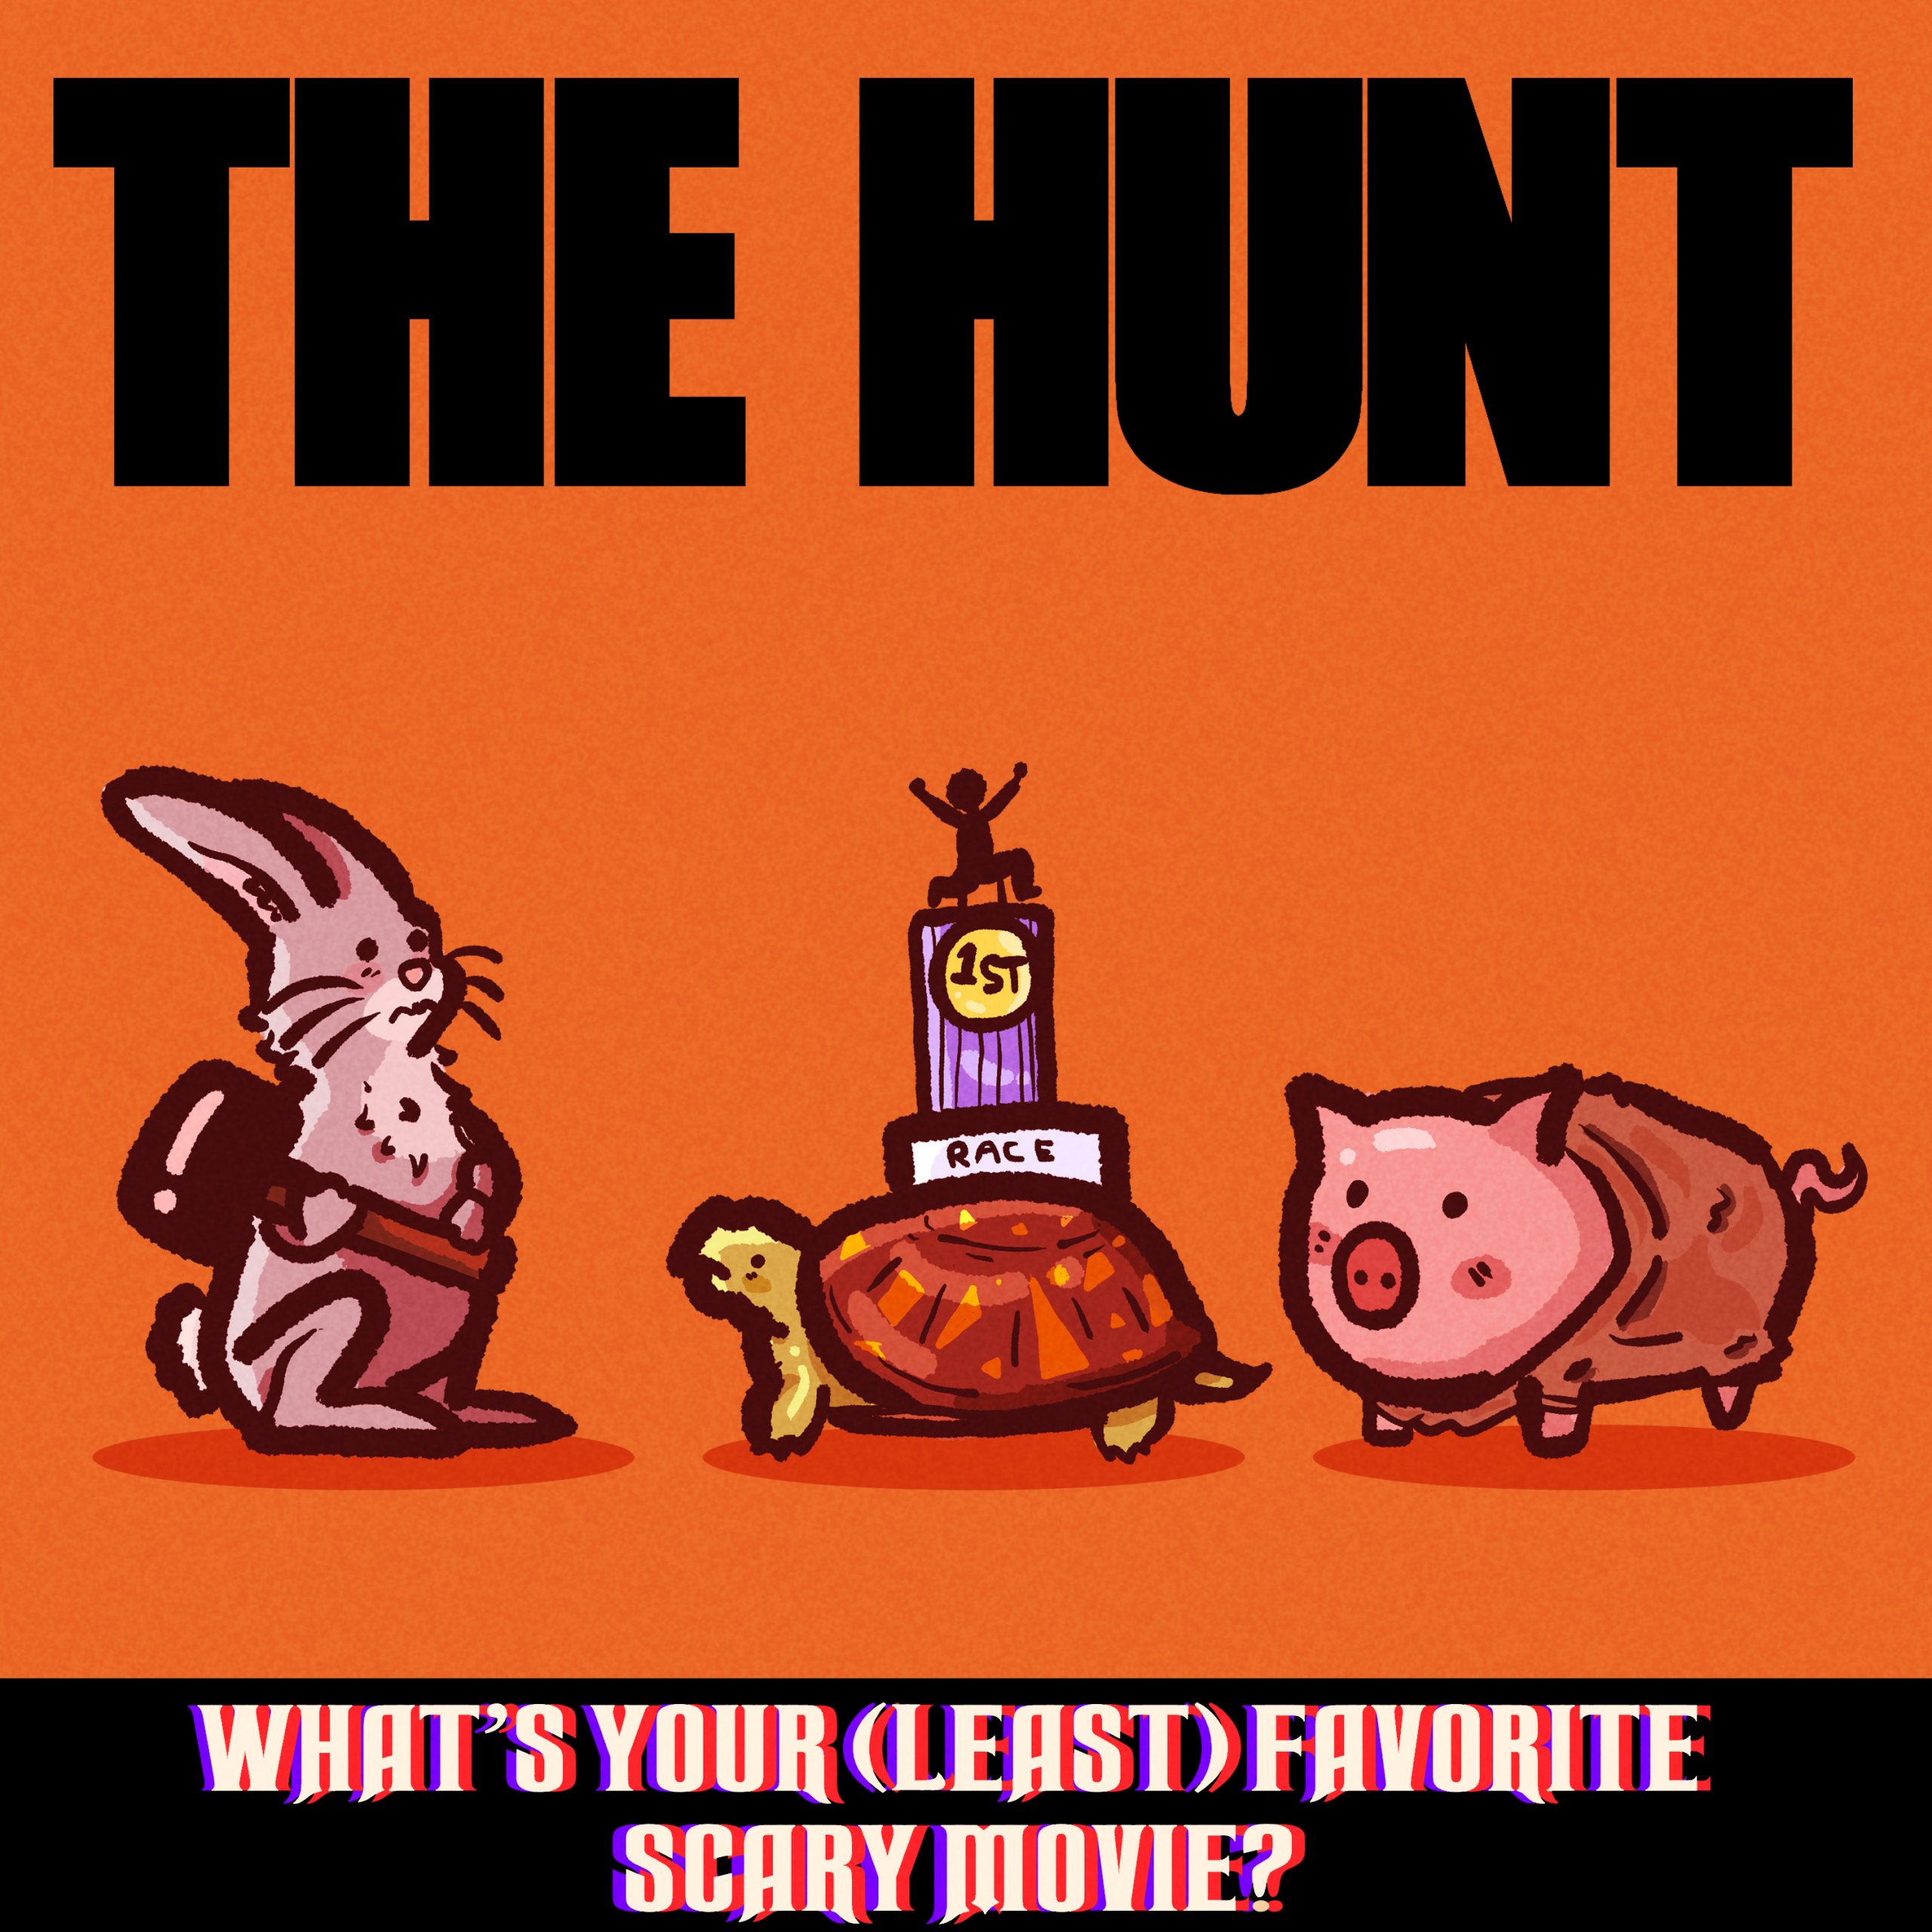 #161: The Hunt (2020)